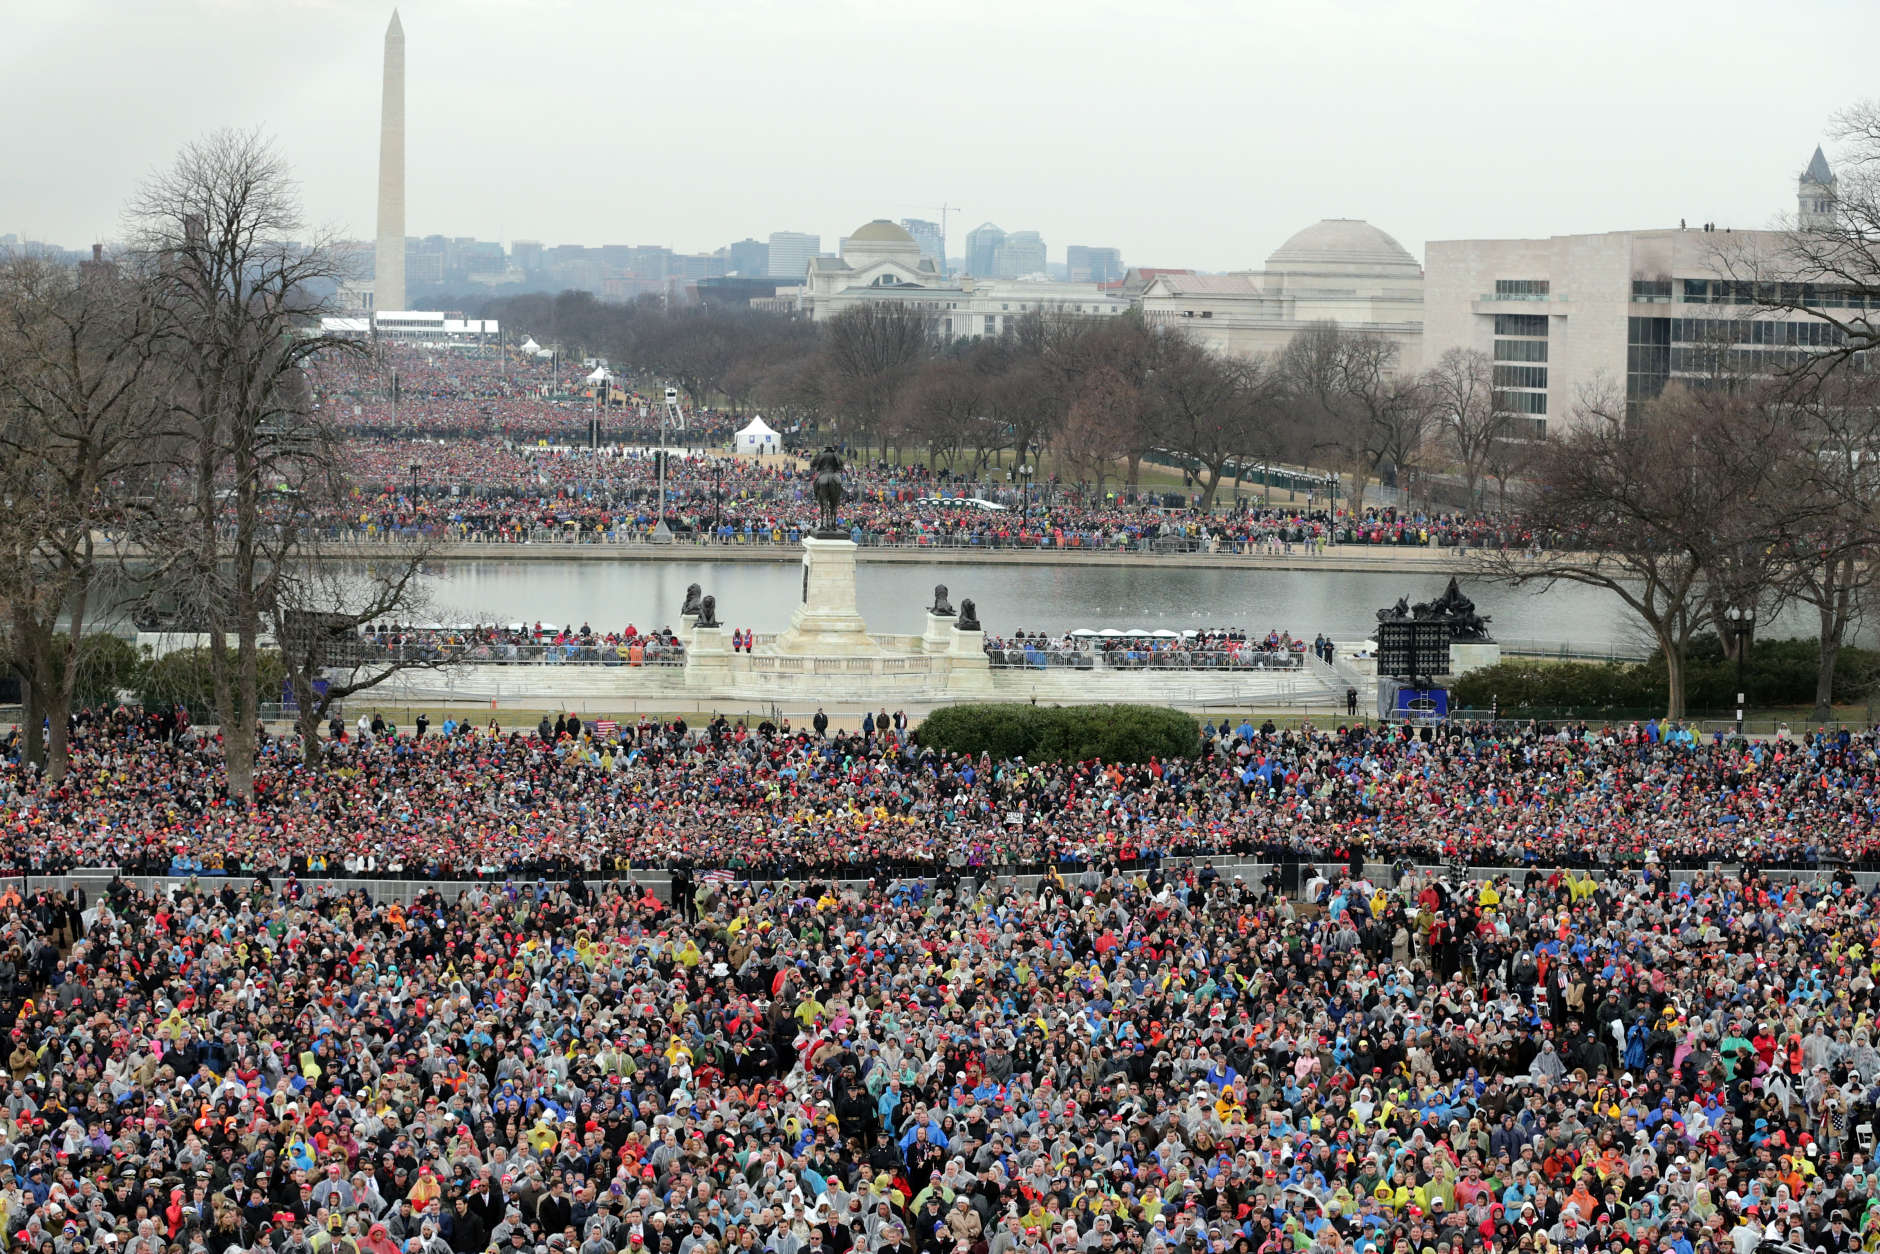 WASHINGTON, DC - JANUARY 20:  Crowds on the National Mall and in front of the U.S. Capitol watch U.S. President Donald Trump deliver his inaugural address on the West Front of the U.S. Capitol on January 20, 2017 in Washington, DC. In today's inauguration ceremony Donald J. Trump becomes the 45th president of the United States.  (Photo by Chip Somodevilla/Getty Images)